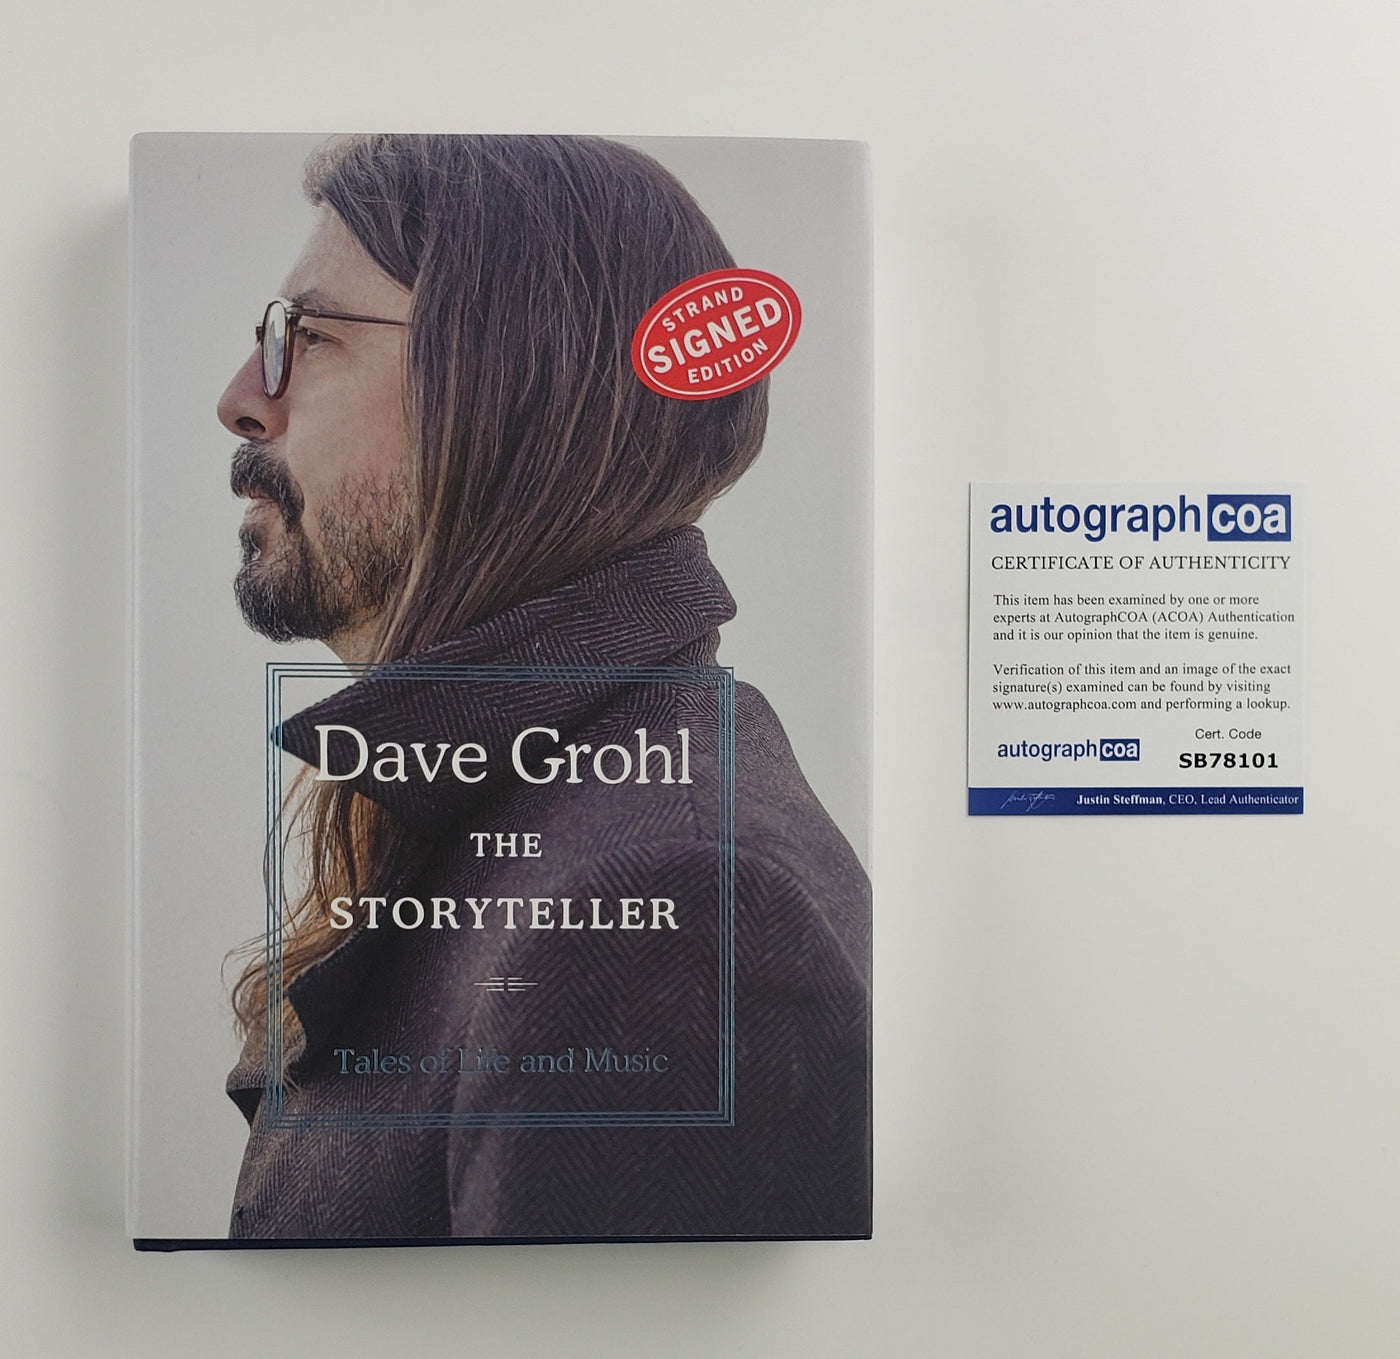 Dave Grohl Autographed Signed Book Storyteller Foo Fighters Nirvana ACOA